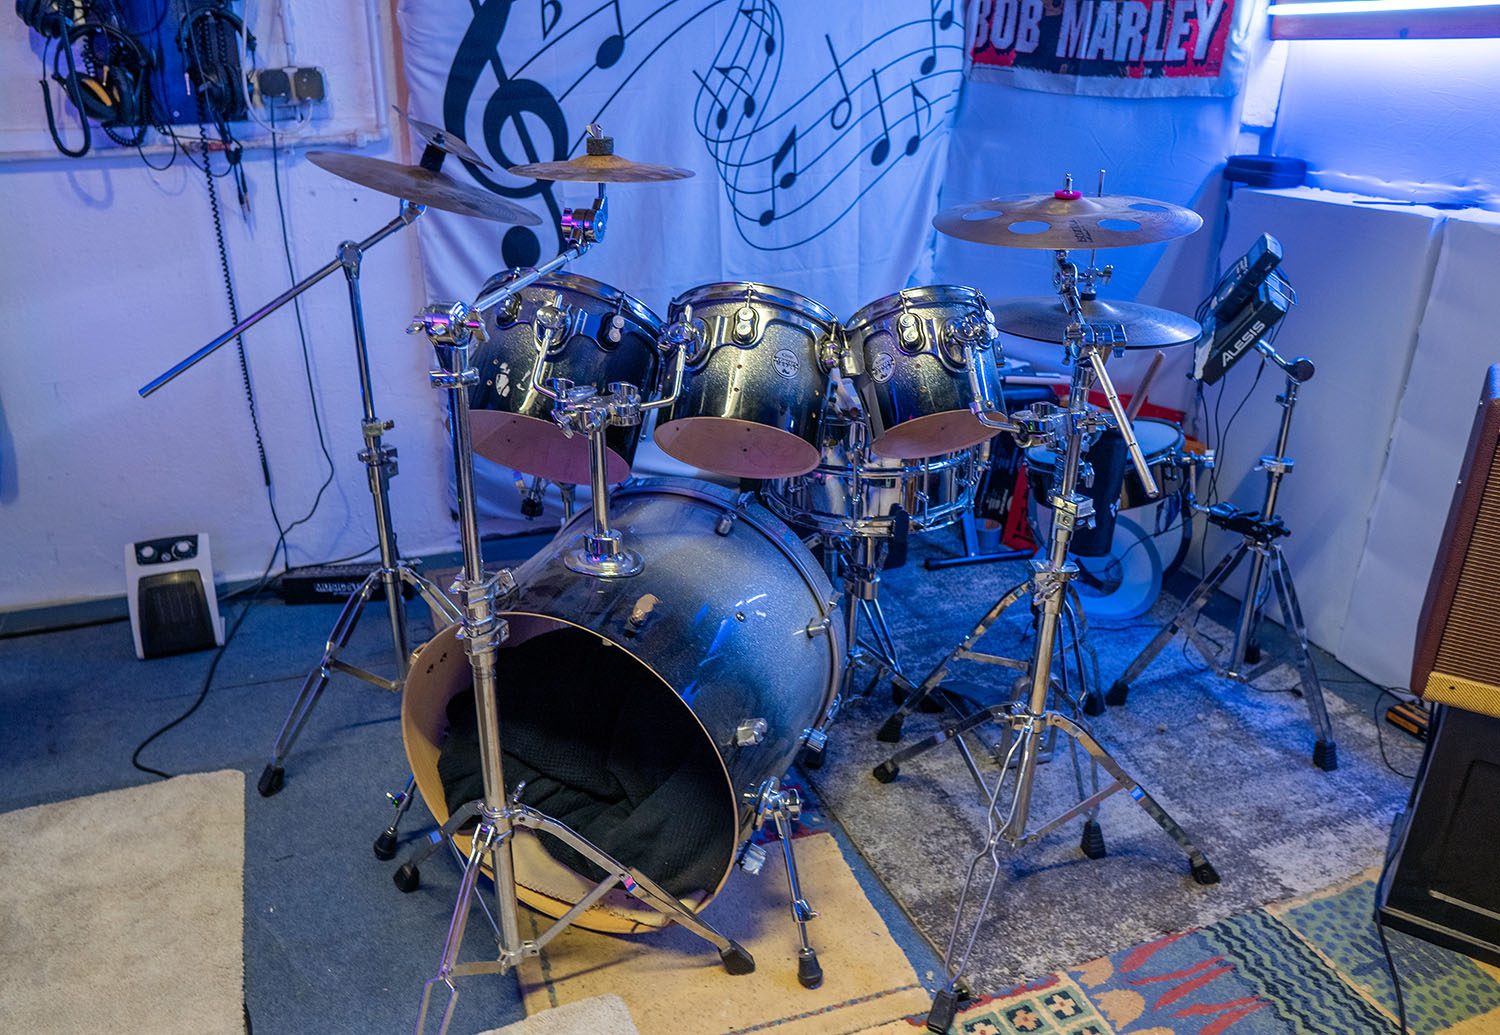 Instructions for setting up a drum kit